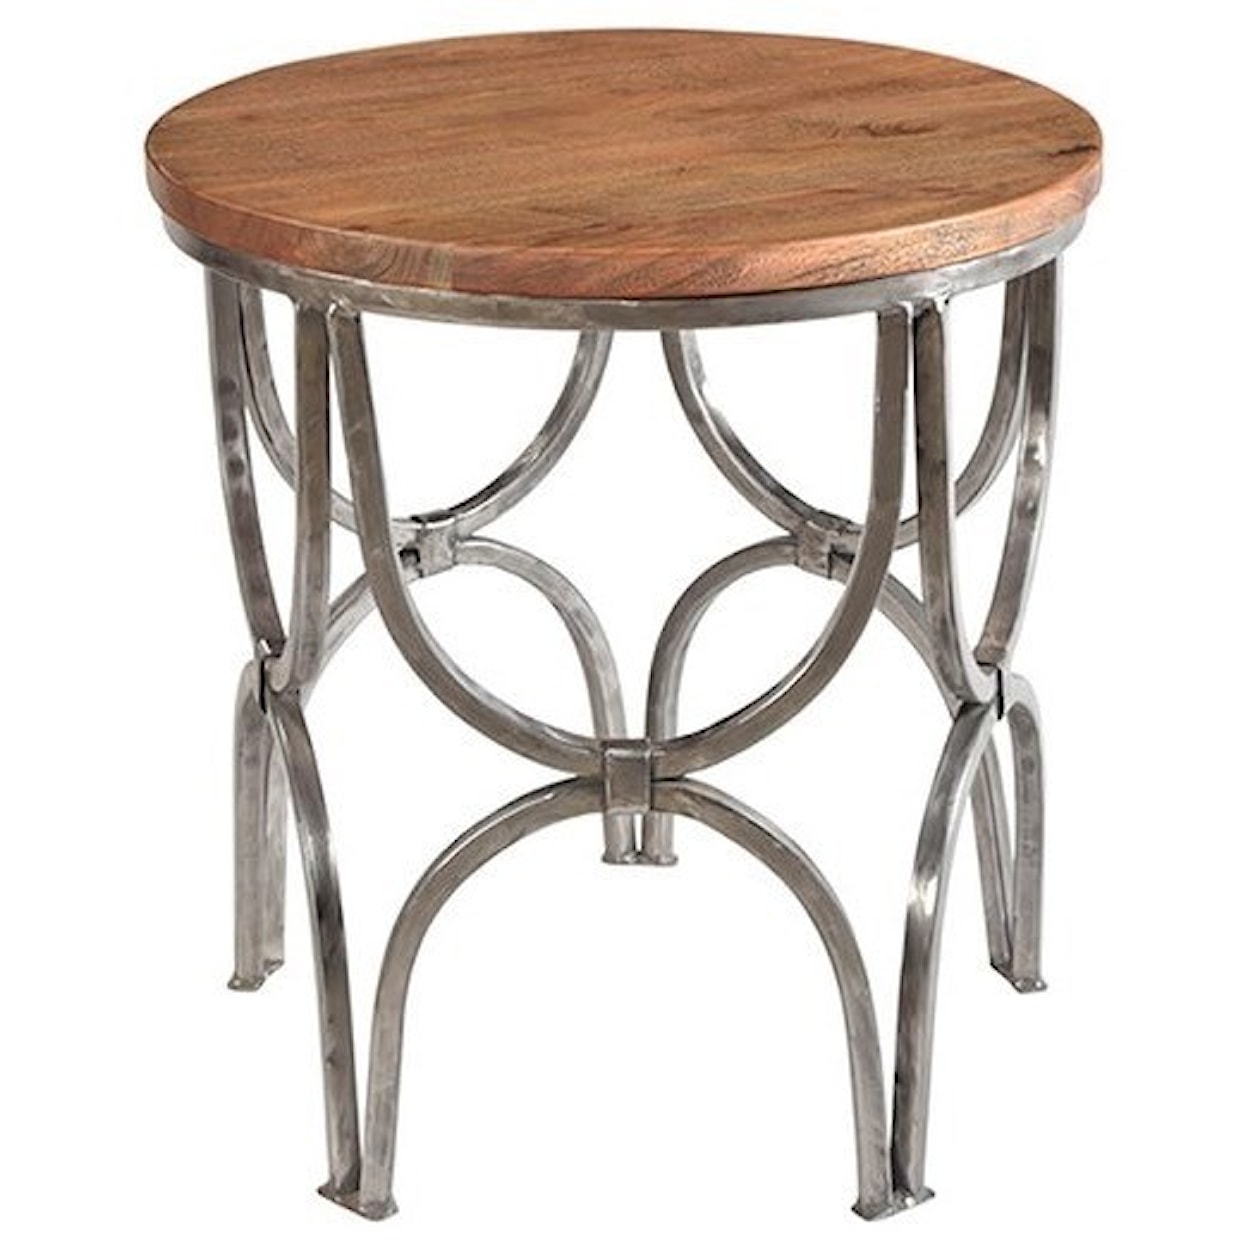 Crestview Collection Accent Furniture Bengal Manor Mango Wood and Steel Round End